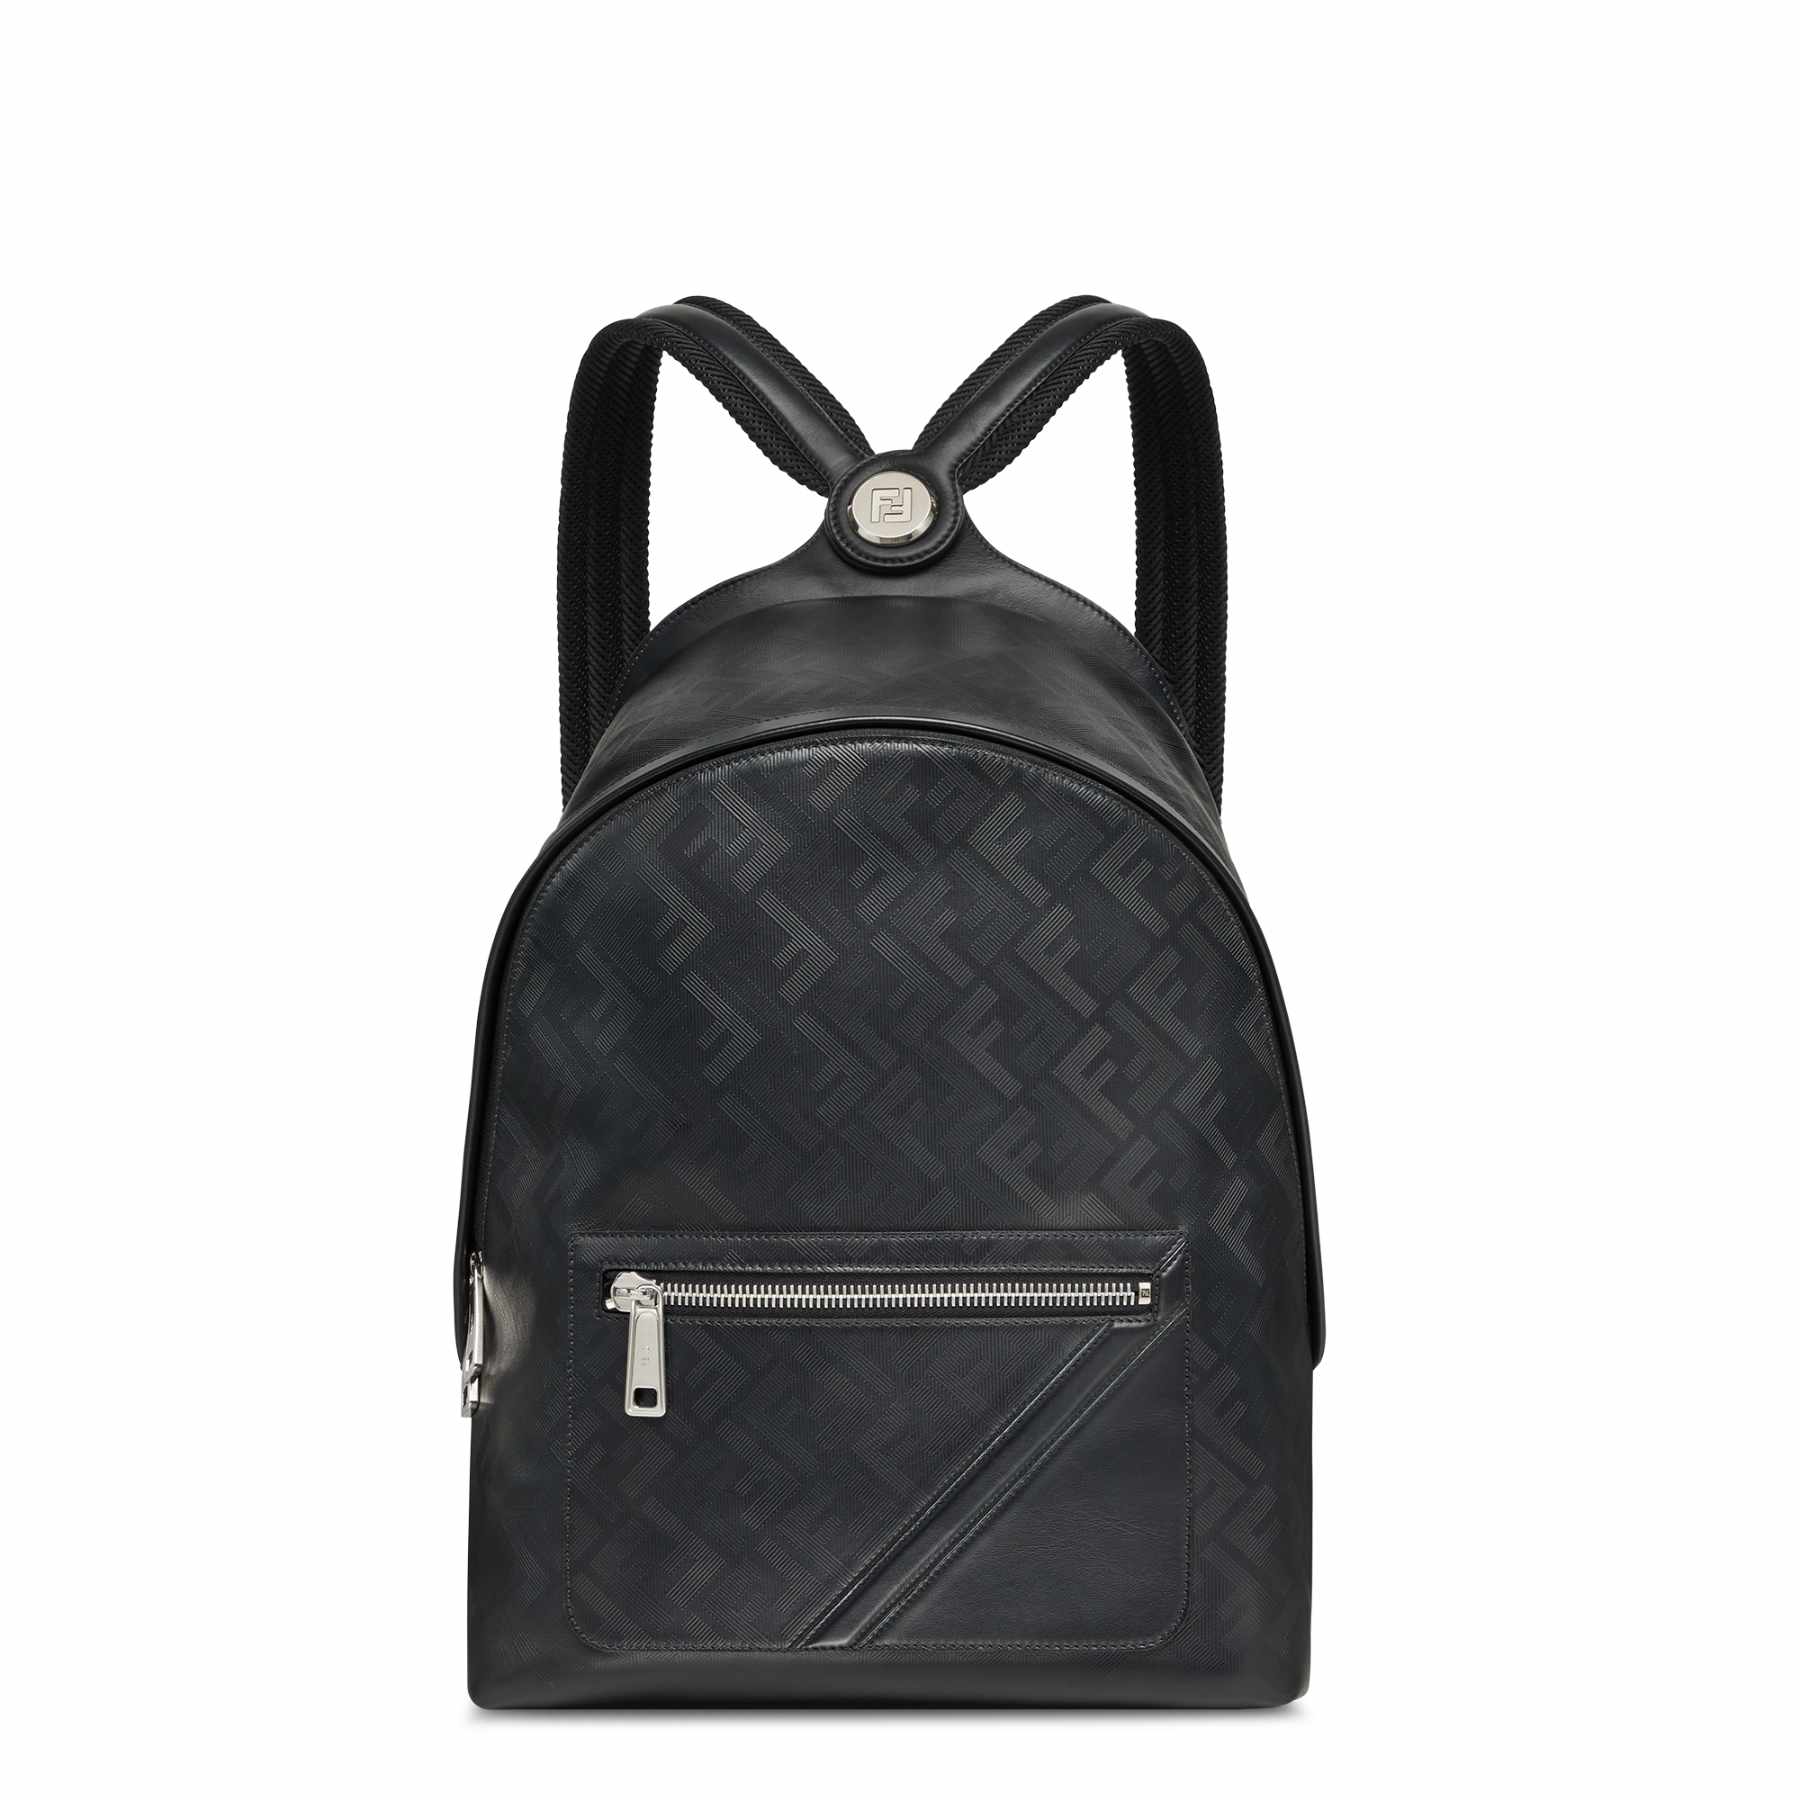 A product shot of Fendi's Chiodo backpack in black monogram